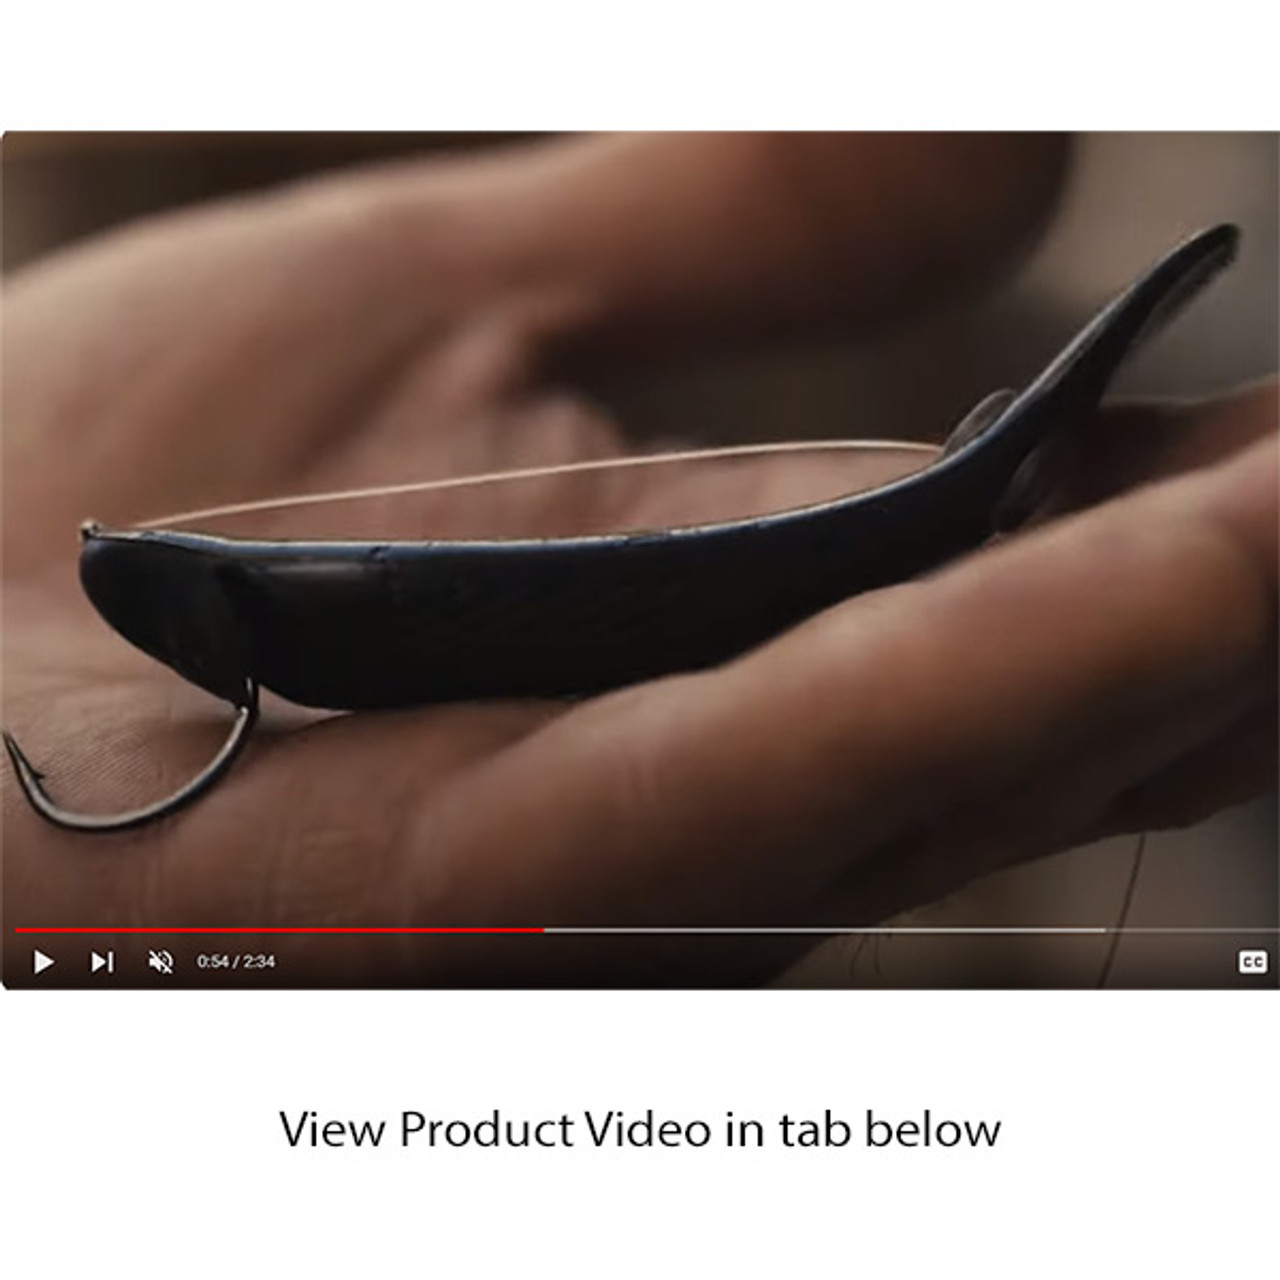 Recoil Minnow 4.25" Bait - Rigged Video